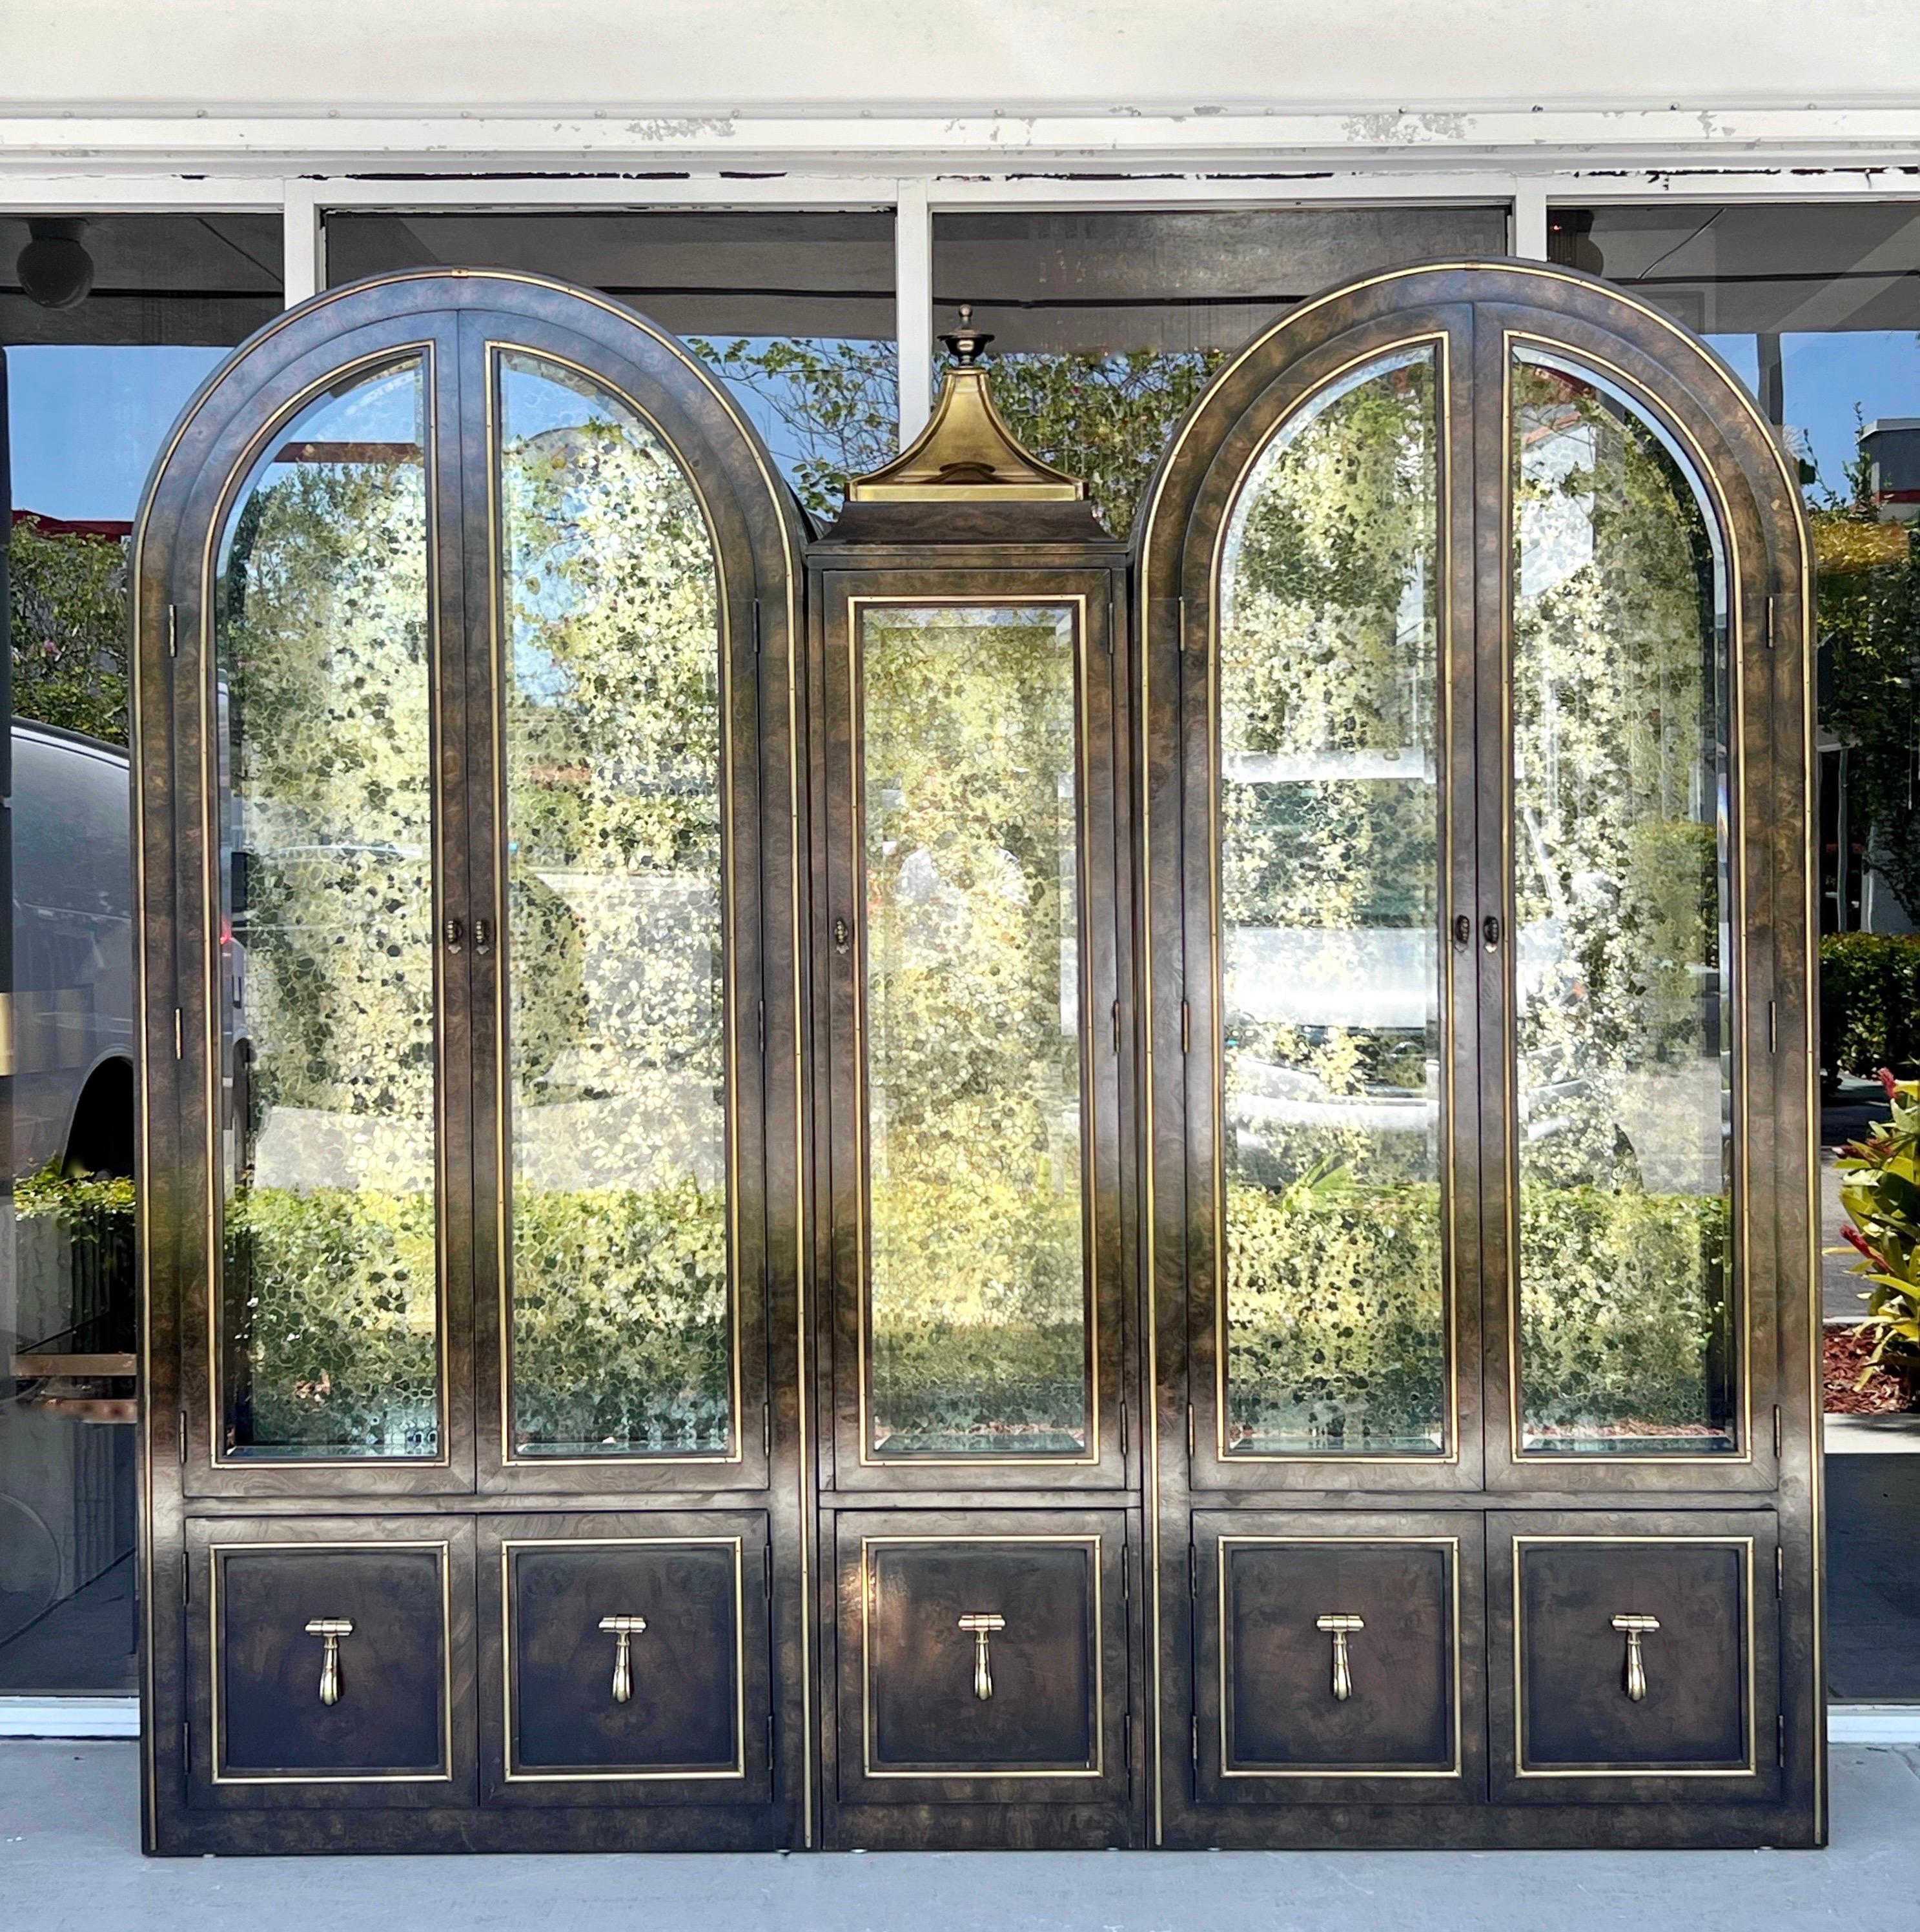 A set of William Doezema for Mastercraft display cabinets. Could be used individually as they are not attached to each other. All cabinets feature brass trim and beveled glass on front doors and sides, and large knocker style brass pulls on the